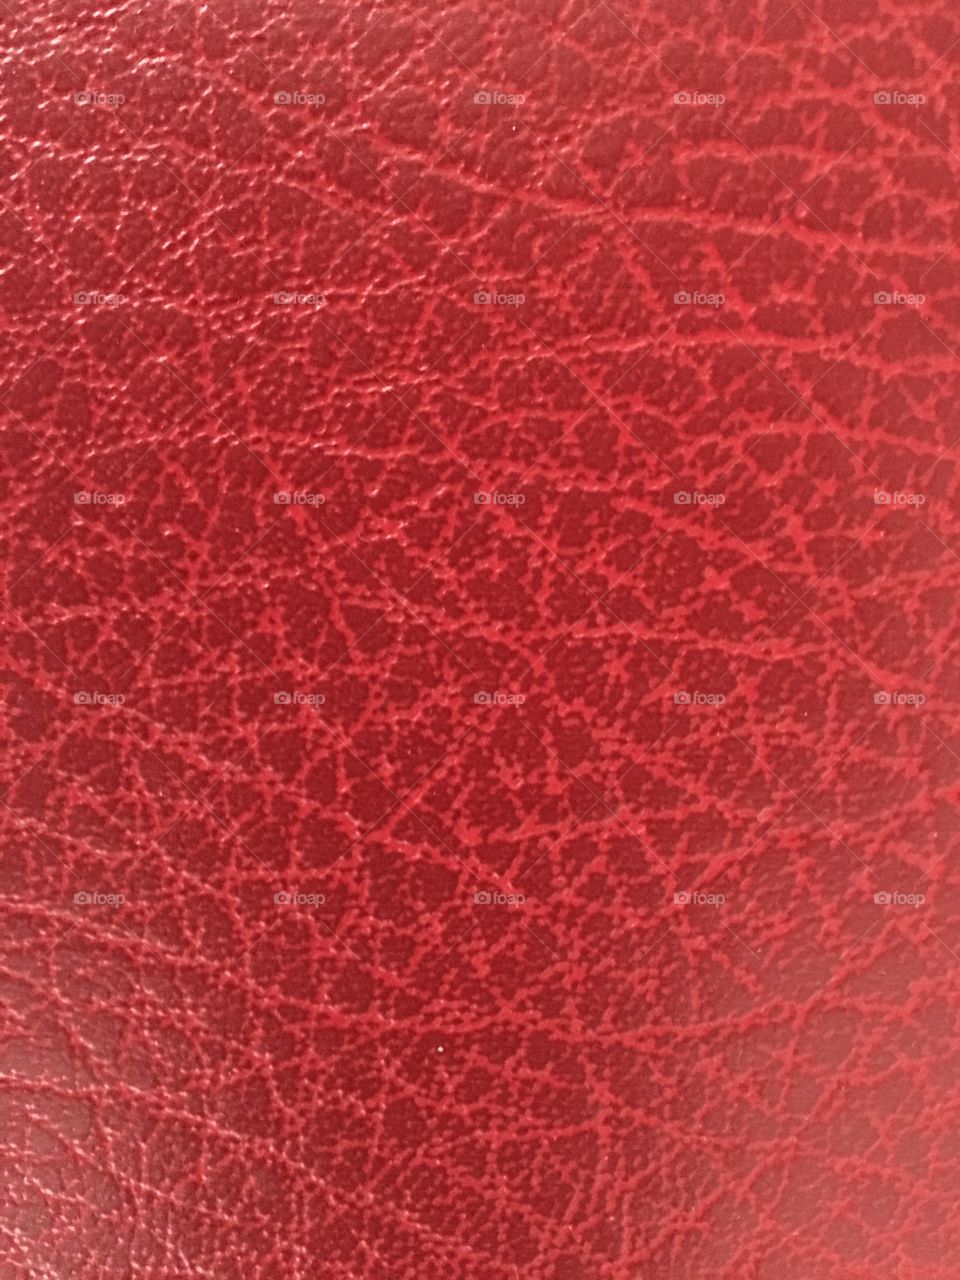 Red leather texture 